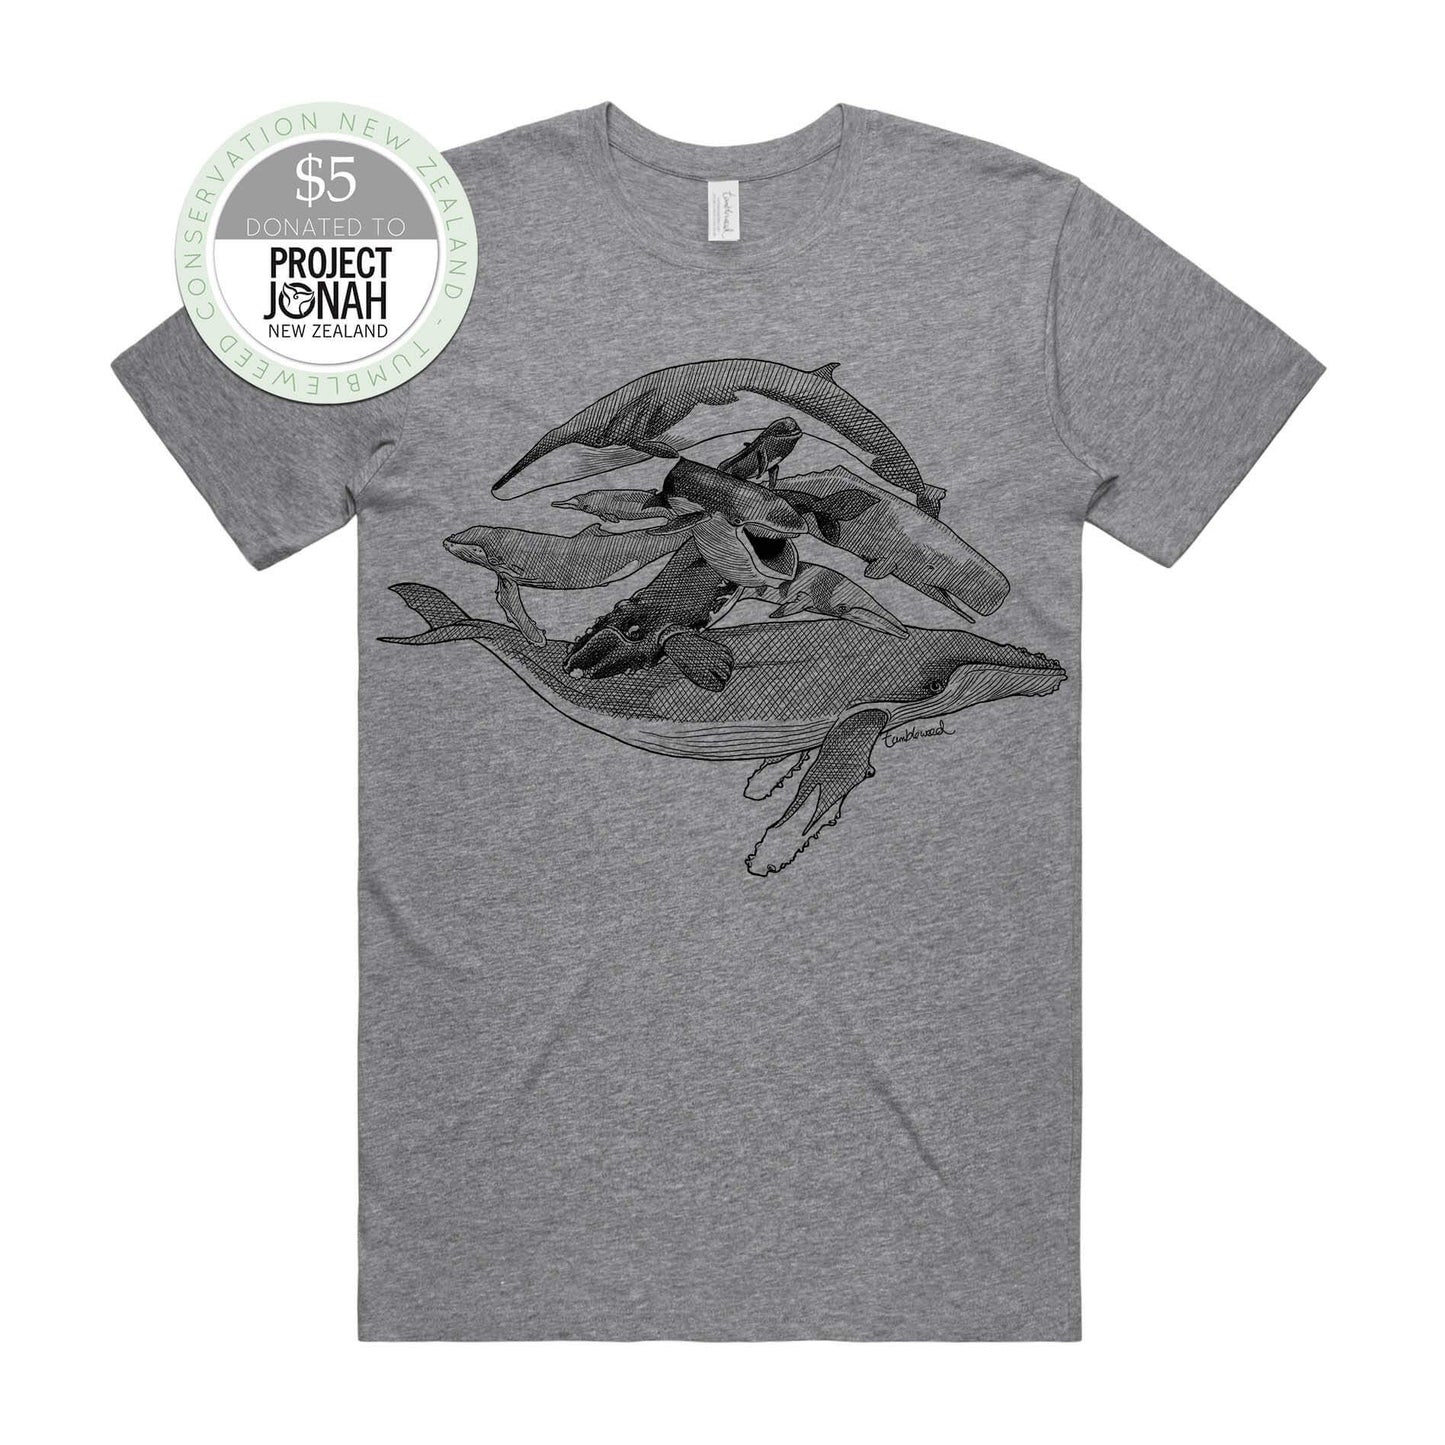 Grey marle, male t-shirt featuring a screen printed Whales design.